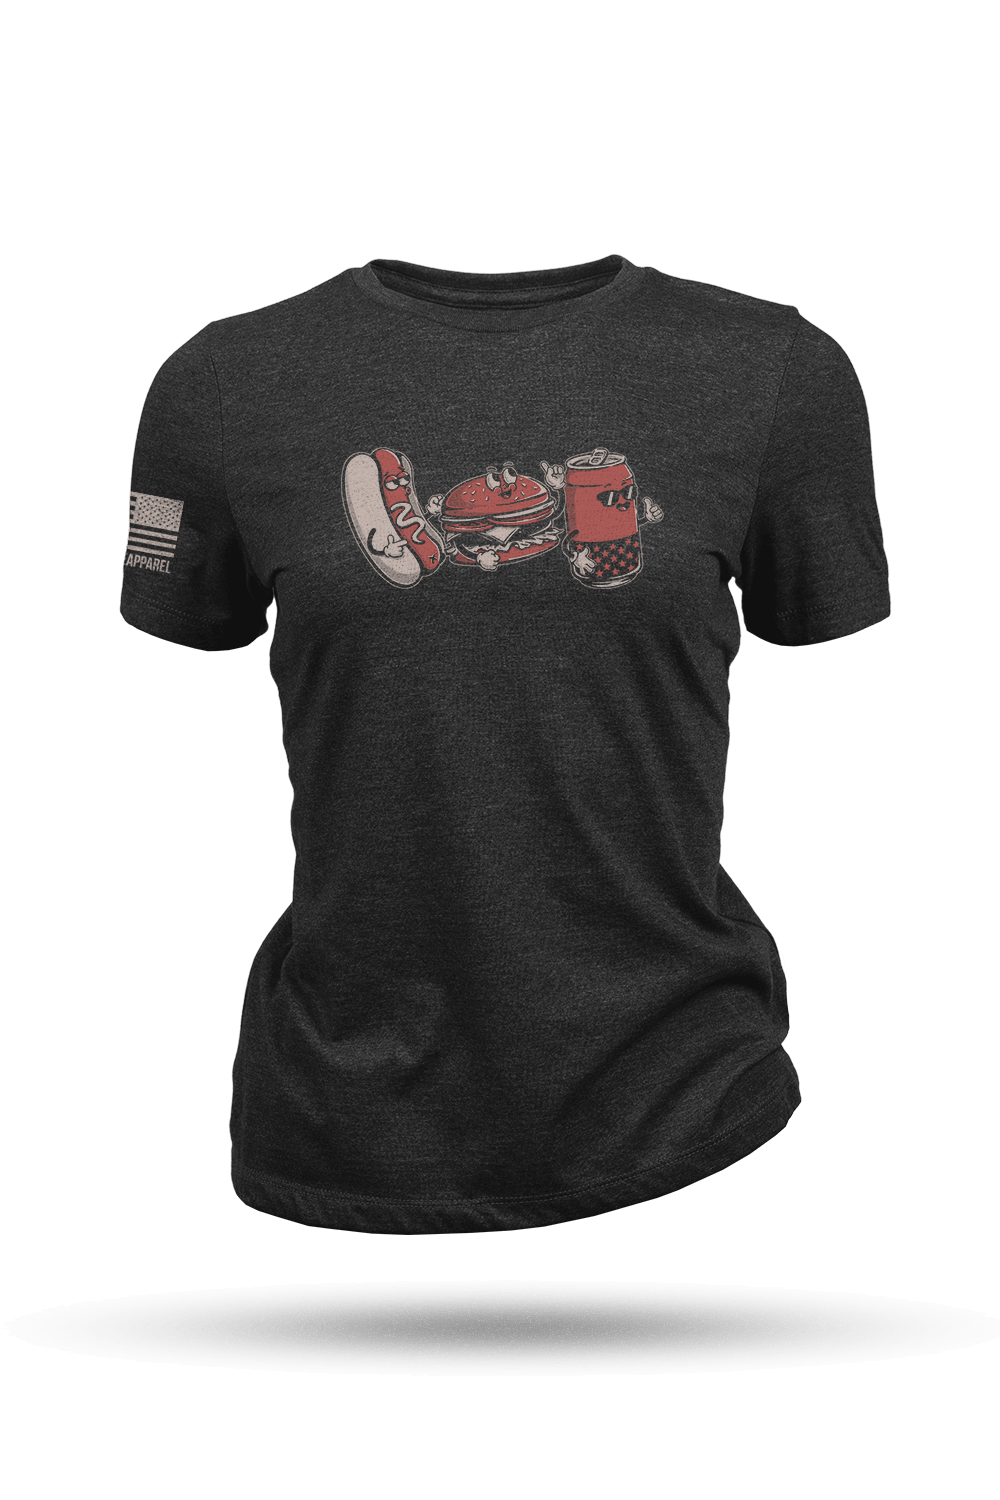 Women's T - Shirt - Let's All Go To The BBQ